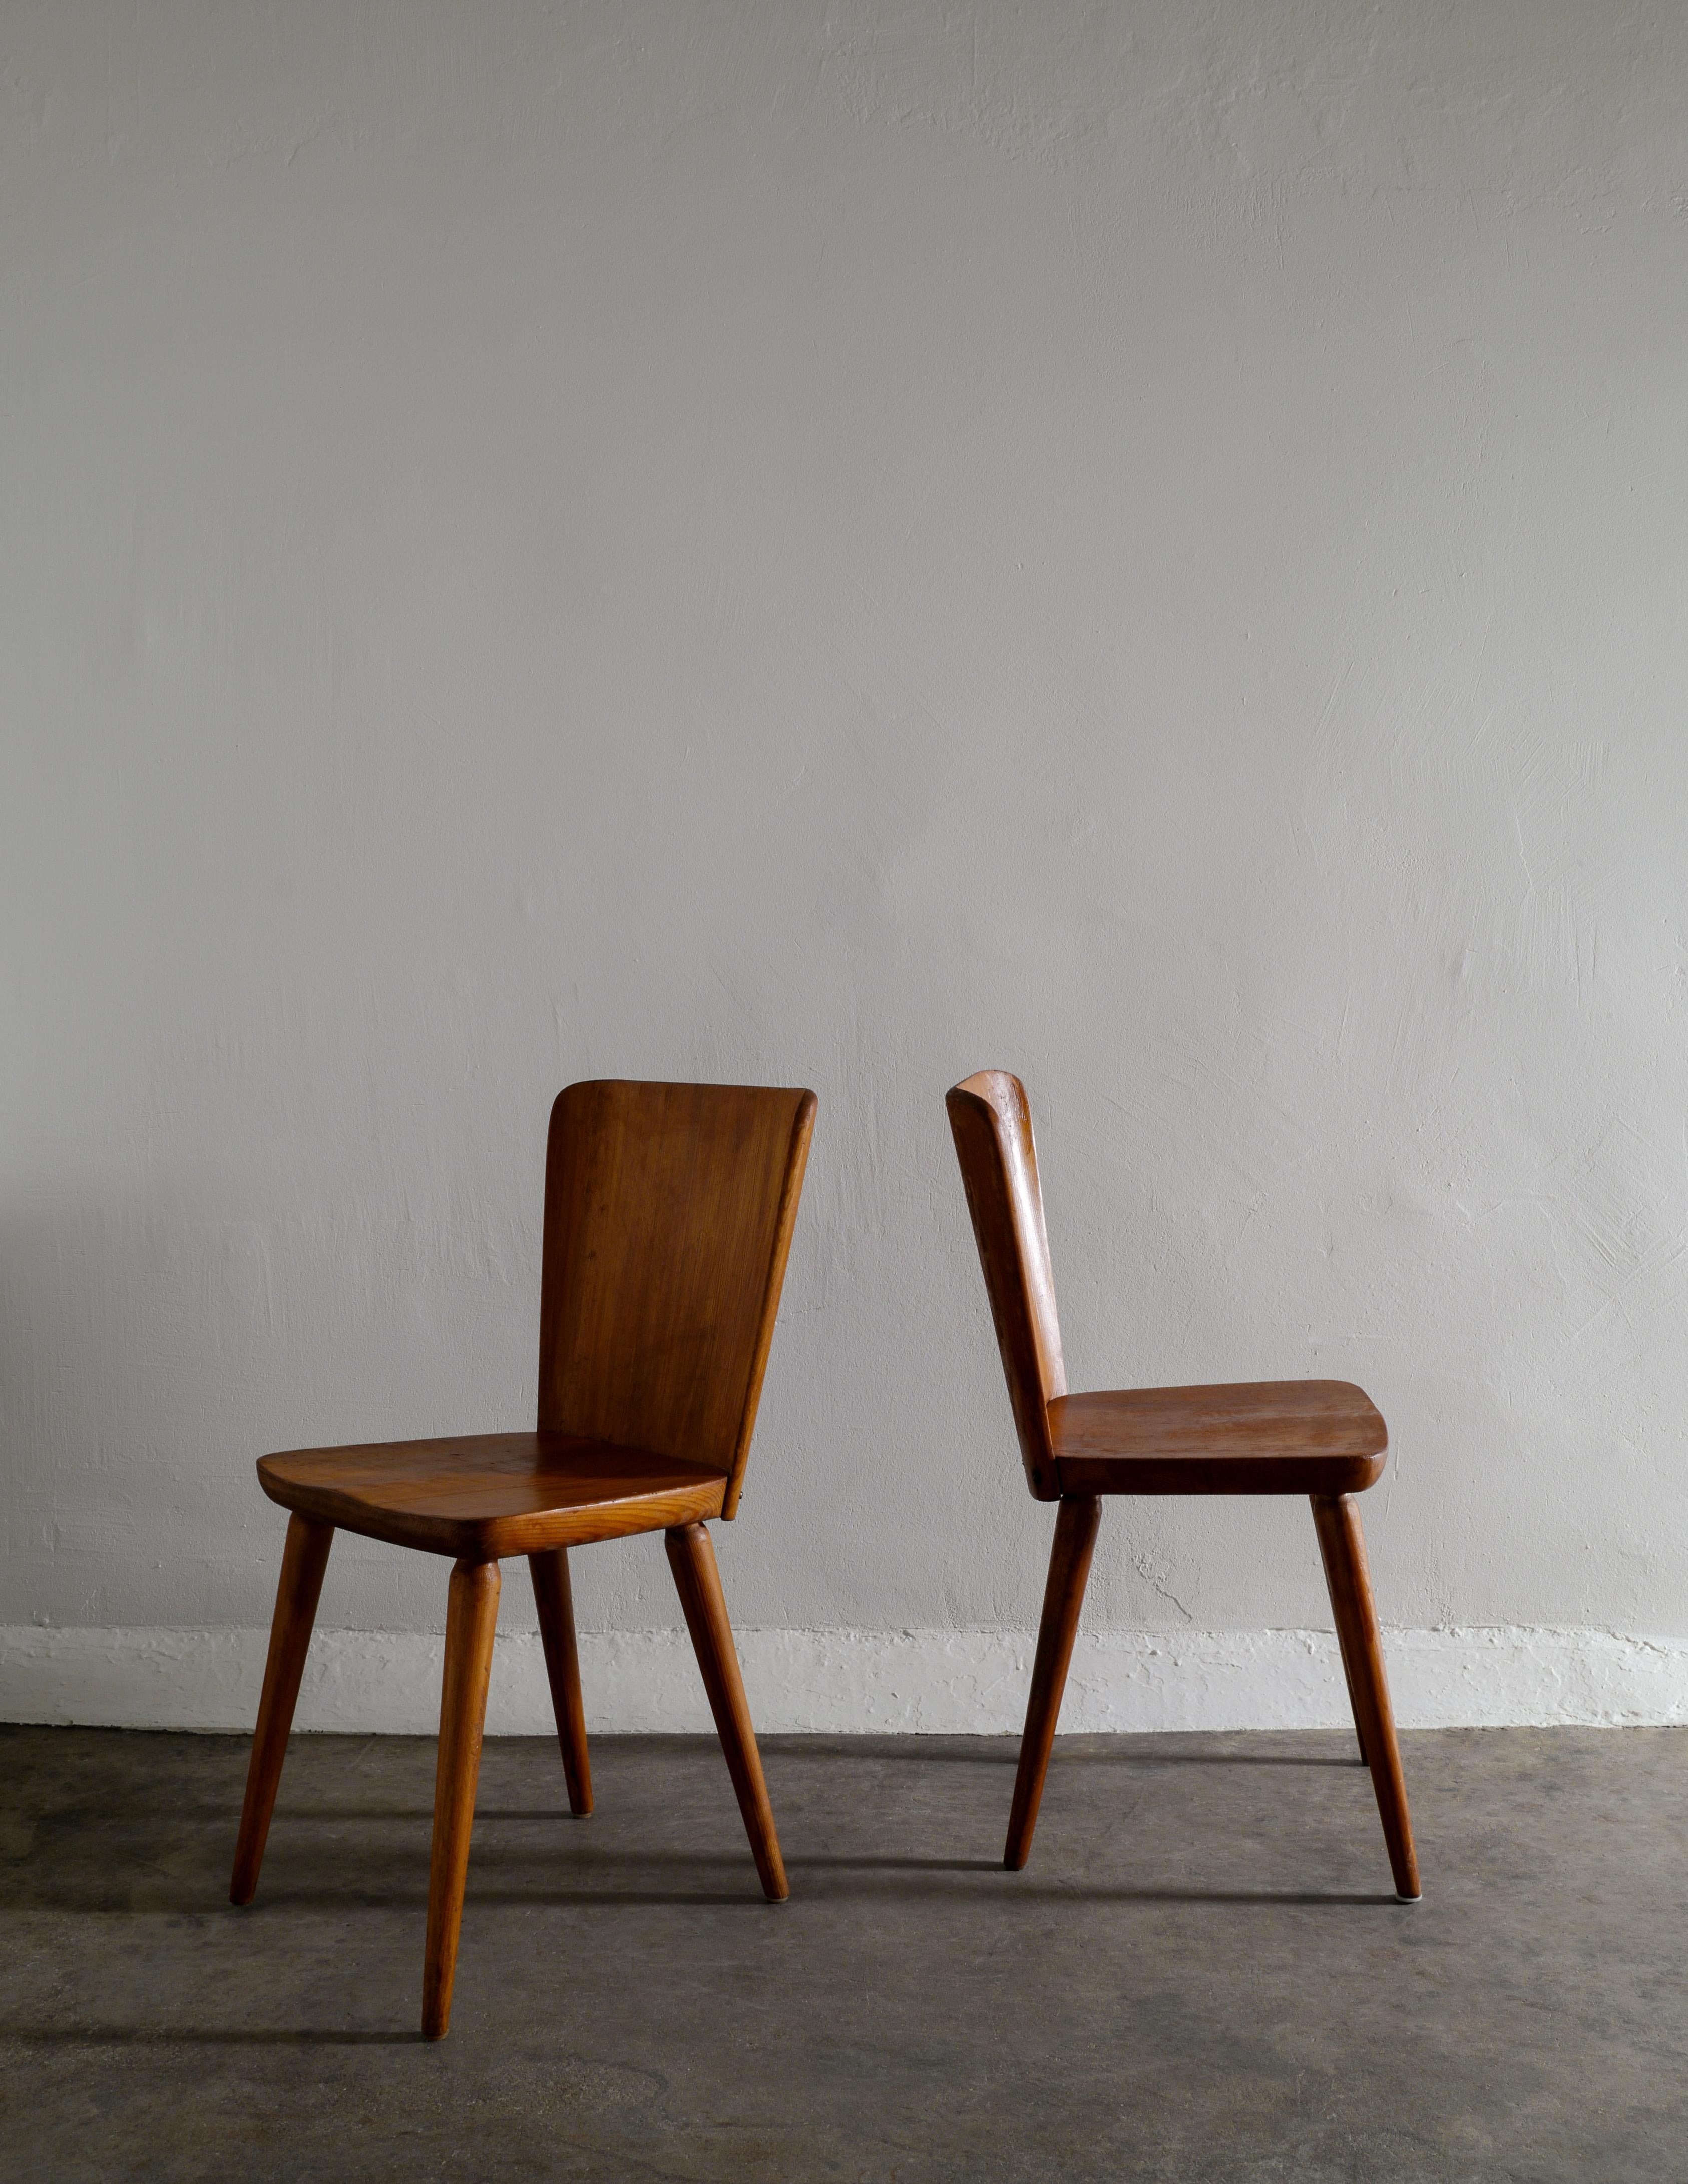 Rare set of six dining chairs in stained pine designed by Göran Malmvall for Svensk Fur in Swede during the 1940s. In good vintage condition with signs from age and use, all chairs have most likely been re-stained with a darker finish over the years